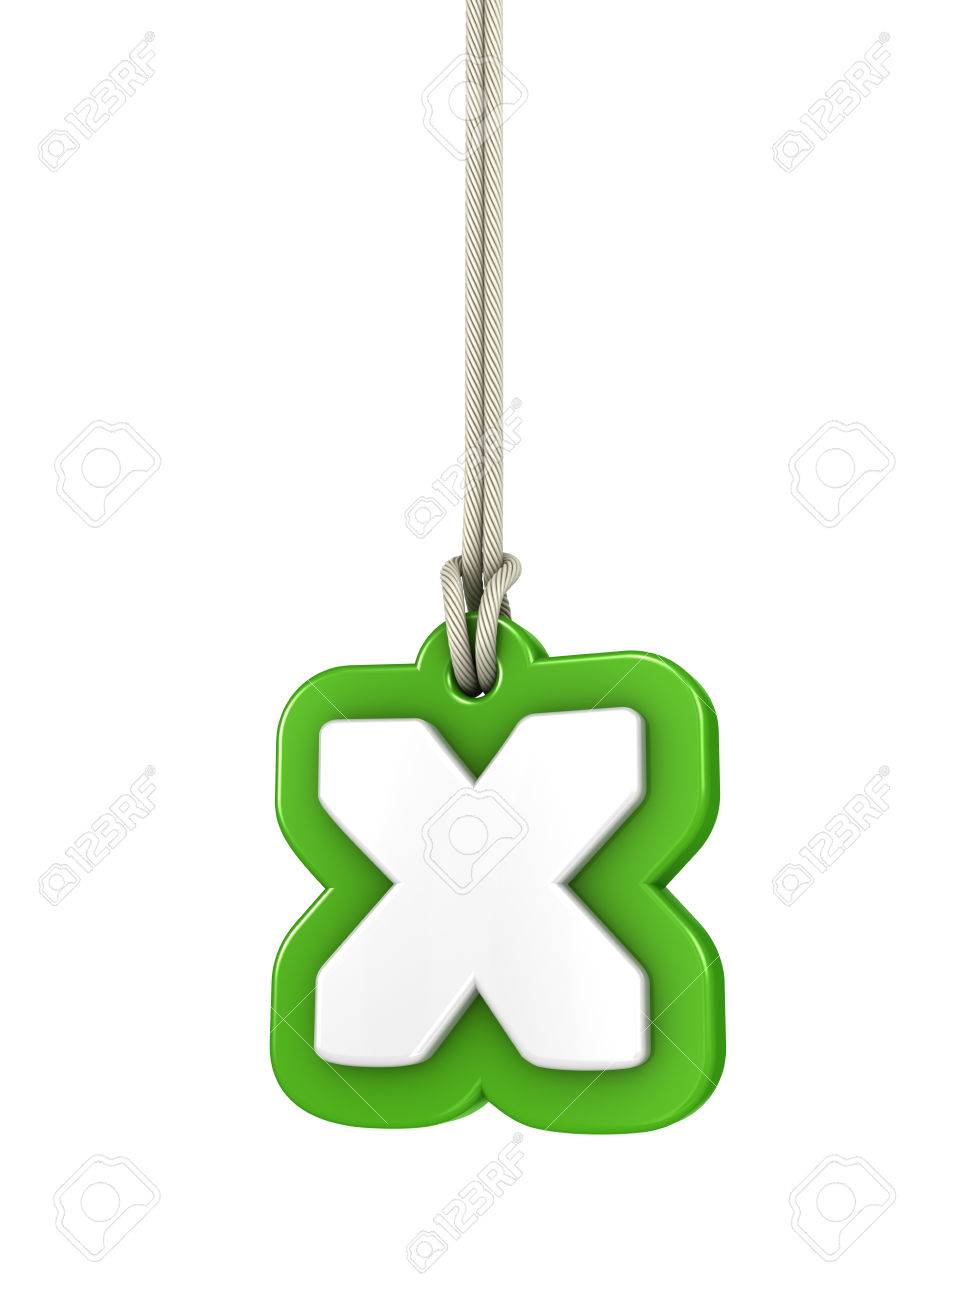 Green lowercase letter x hanging